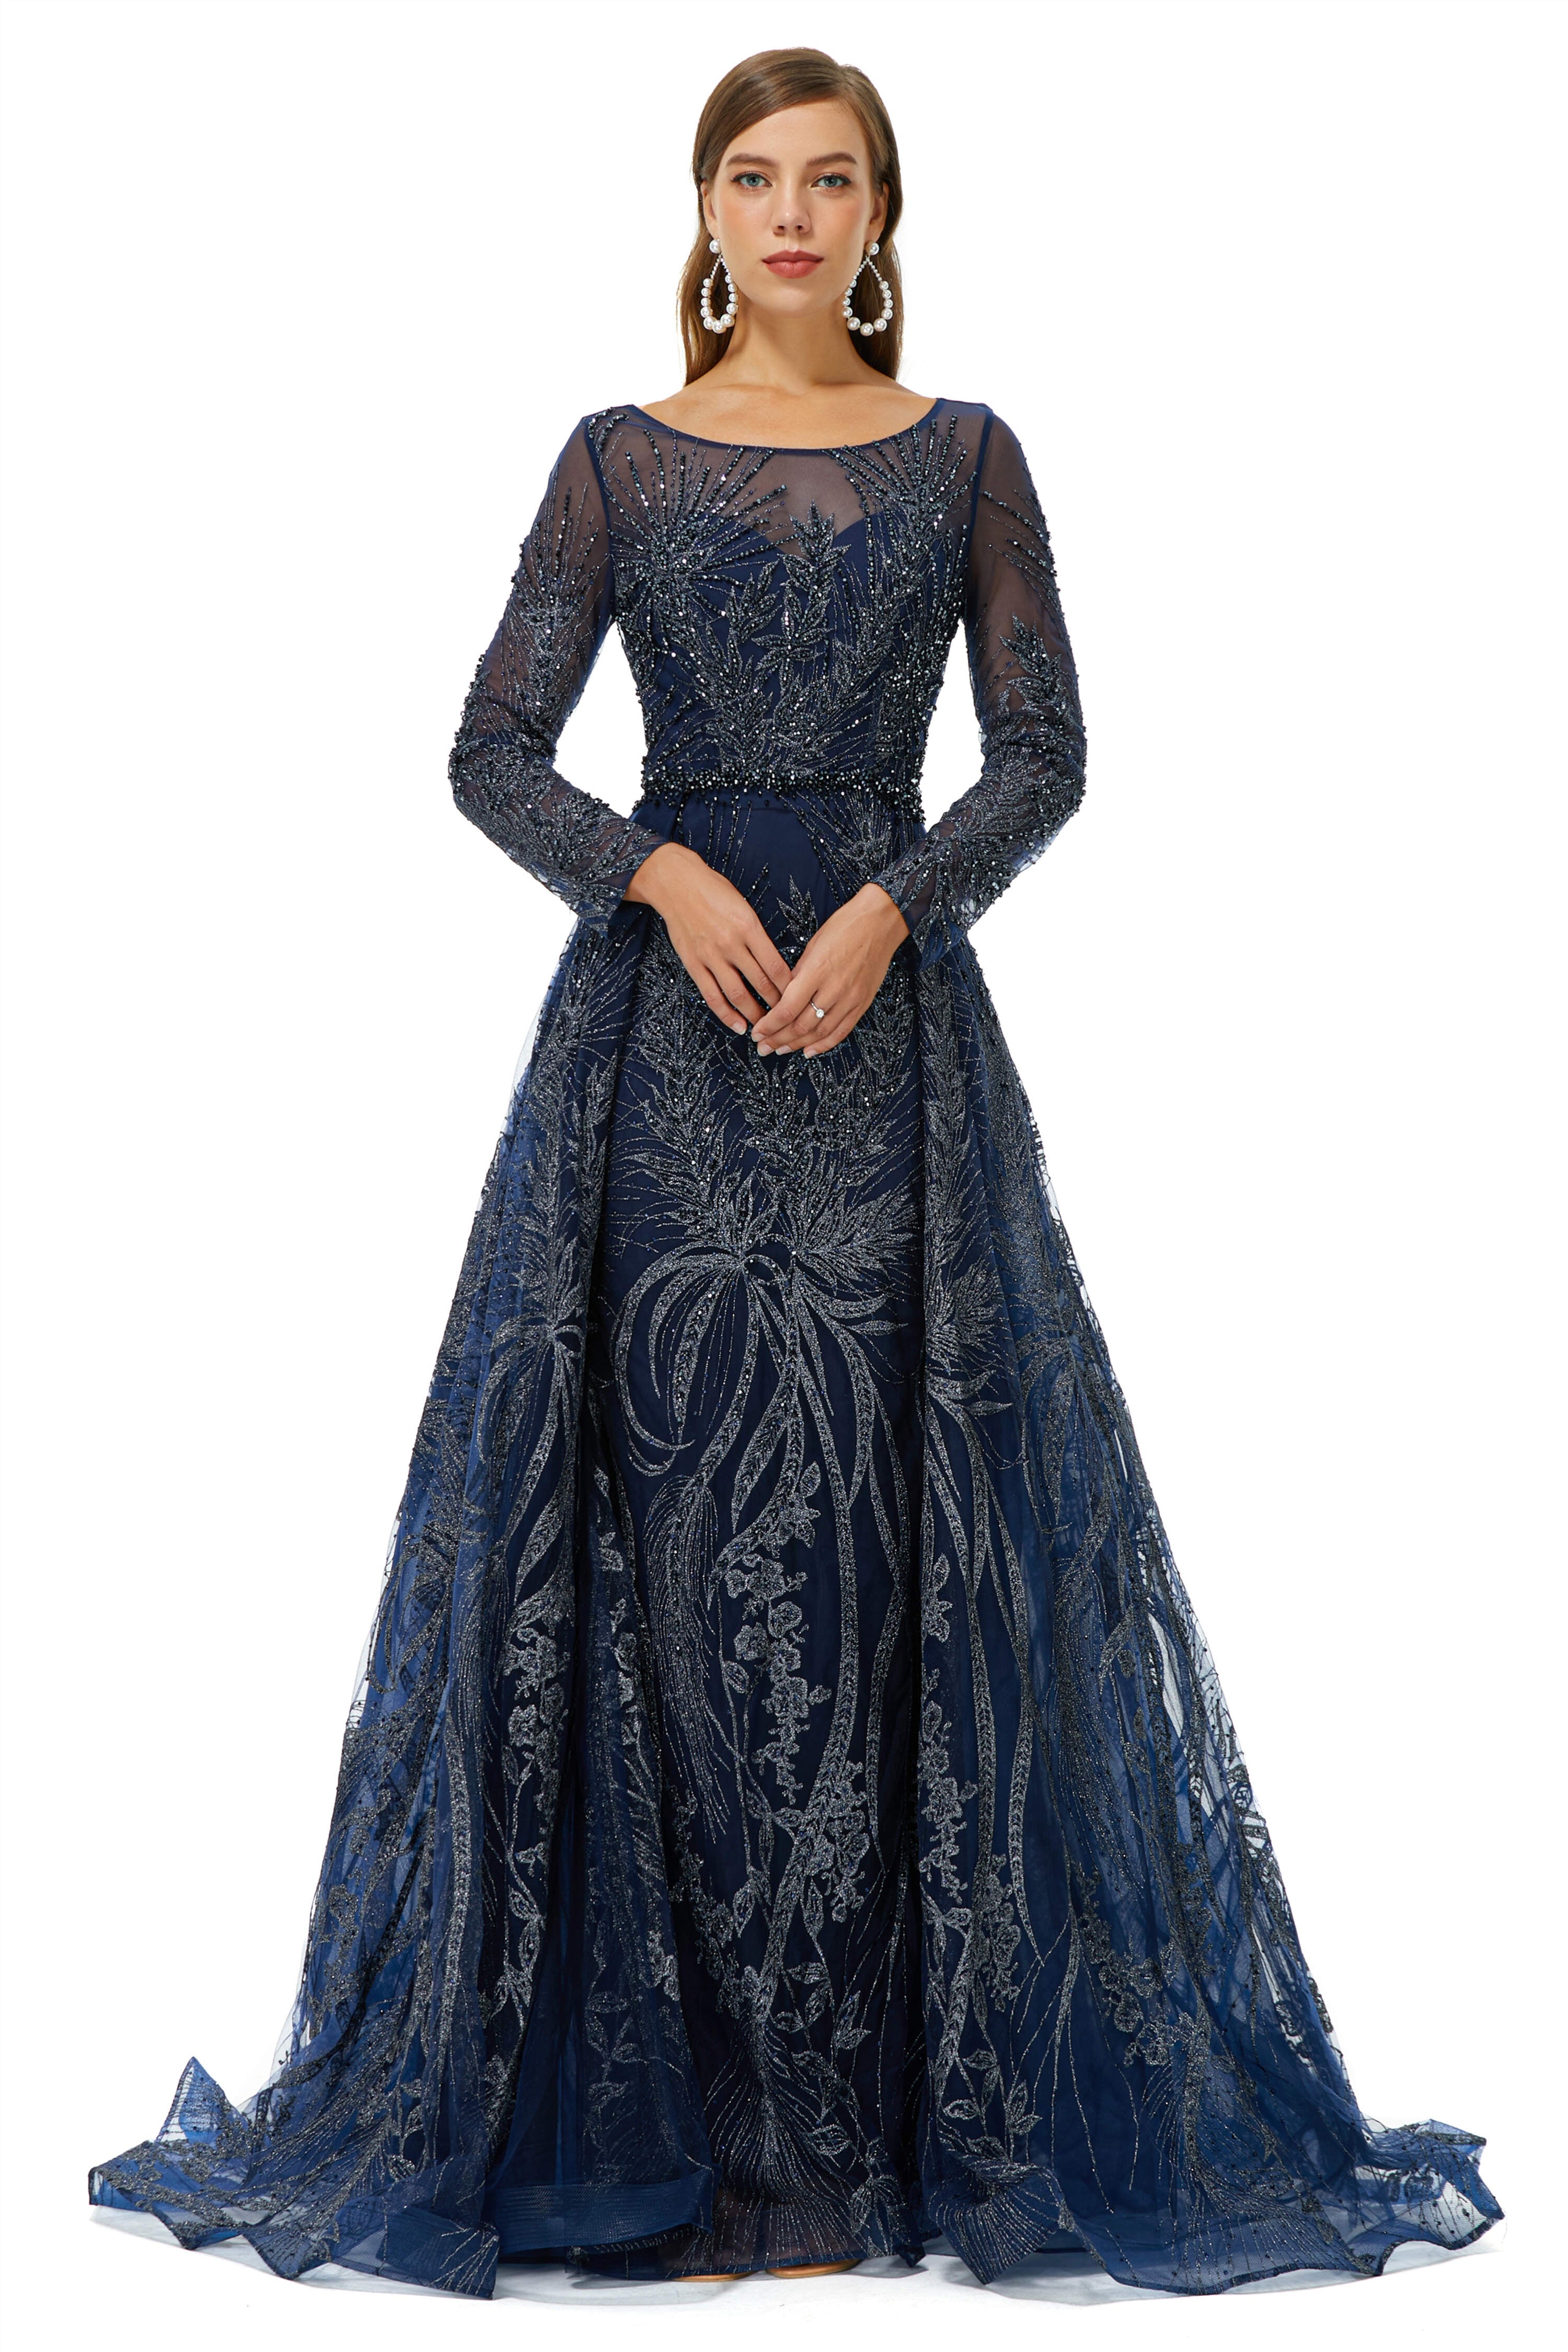 A-line Round Floor-length Long Sleeve Appliques Lace Beaded Corset Prom Dresses outfit, Formal Dress Gowns